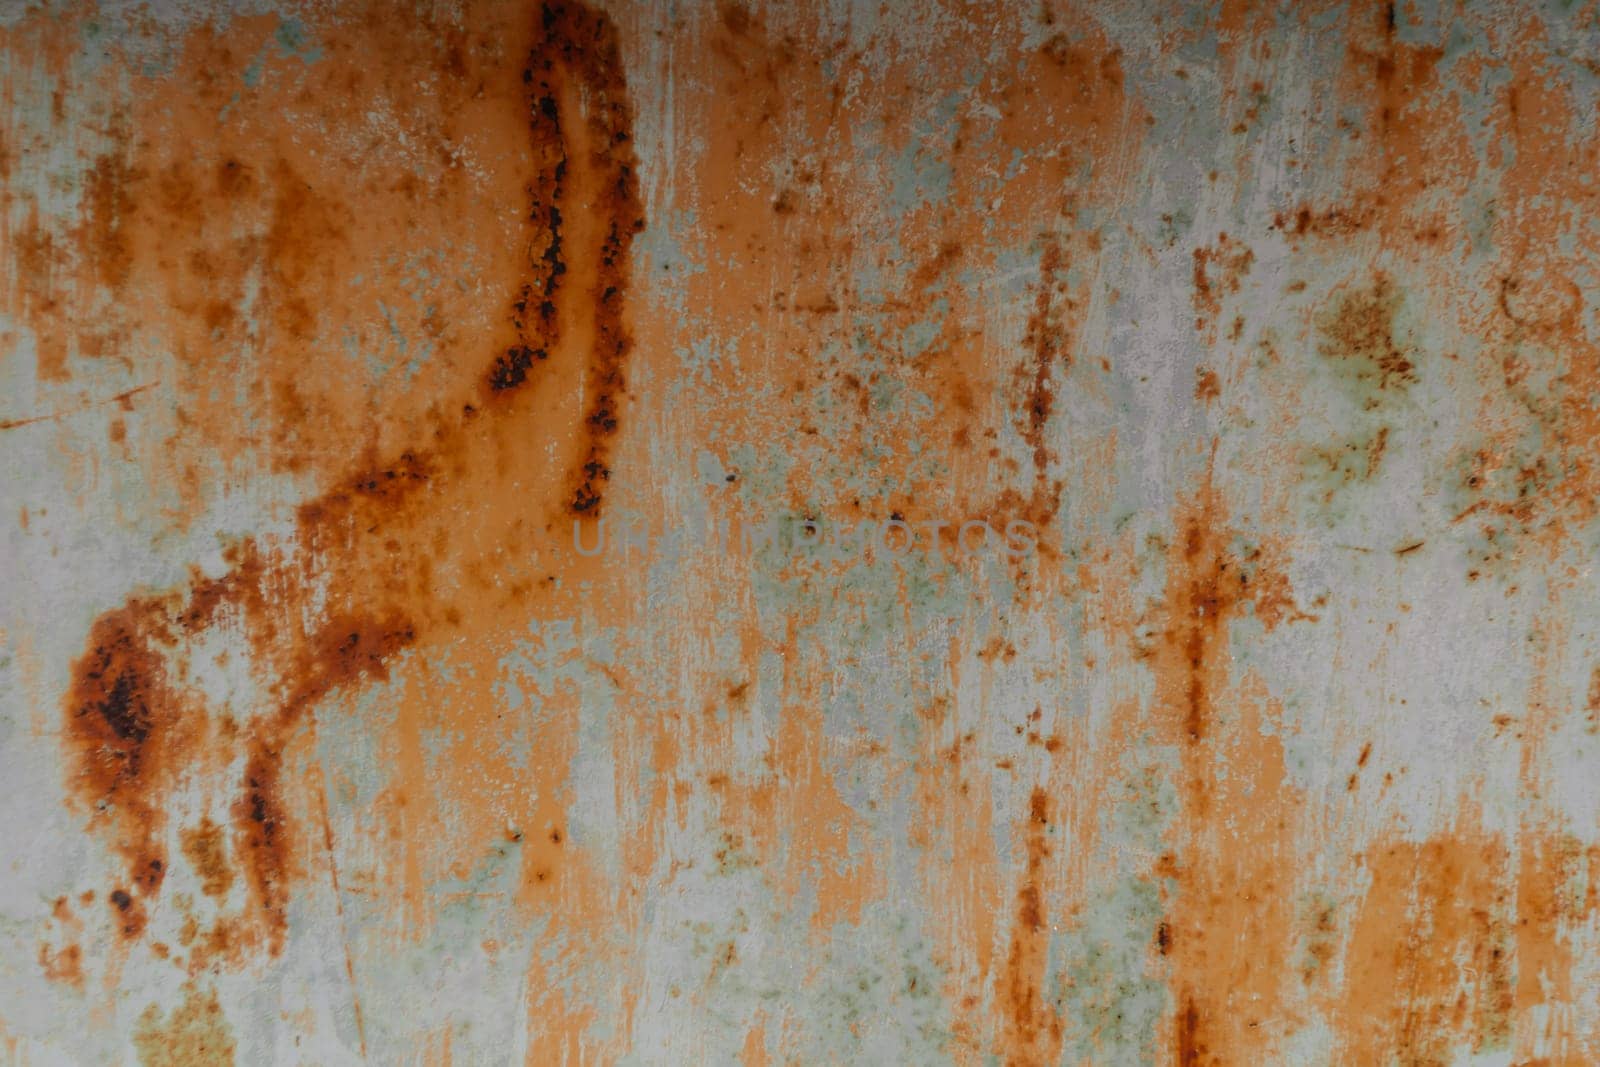 The image is of a rusty metal surface with a greenish tint by Alla_Morozova93